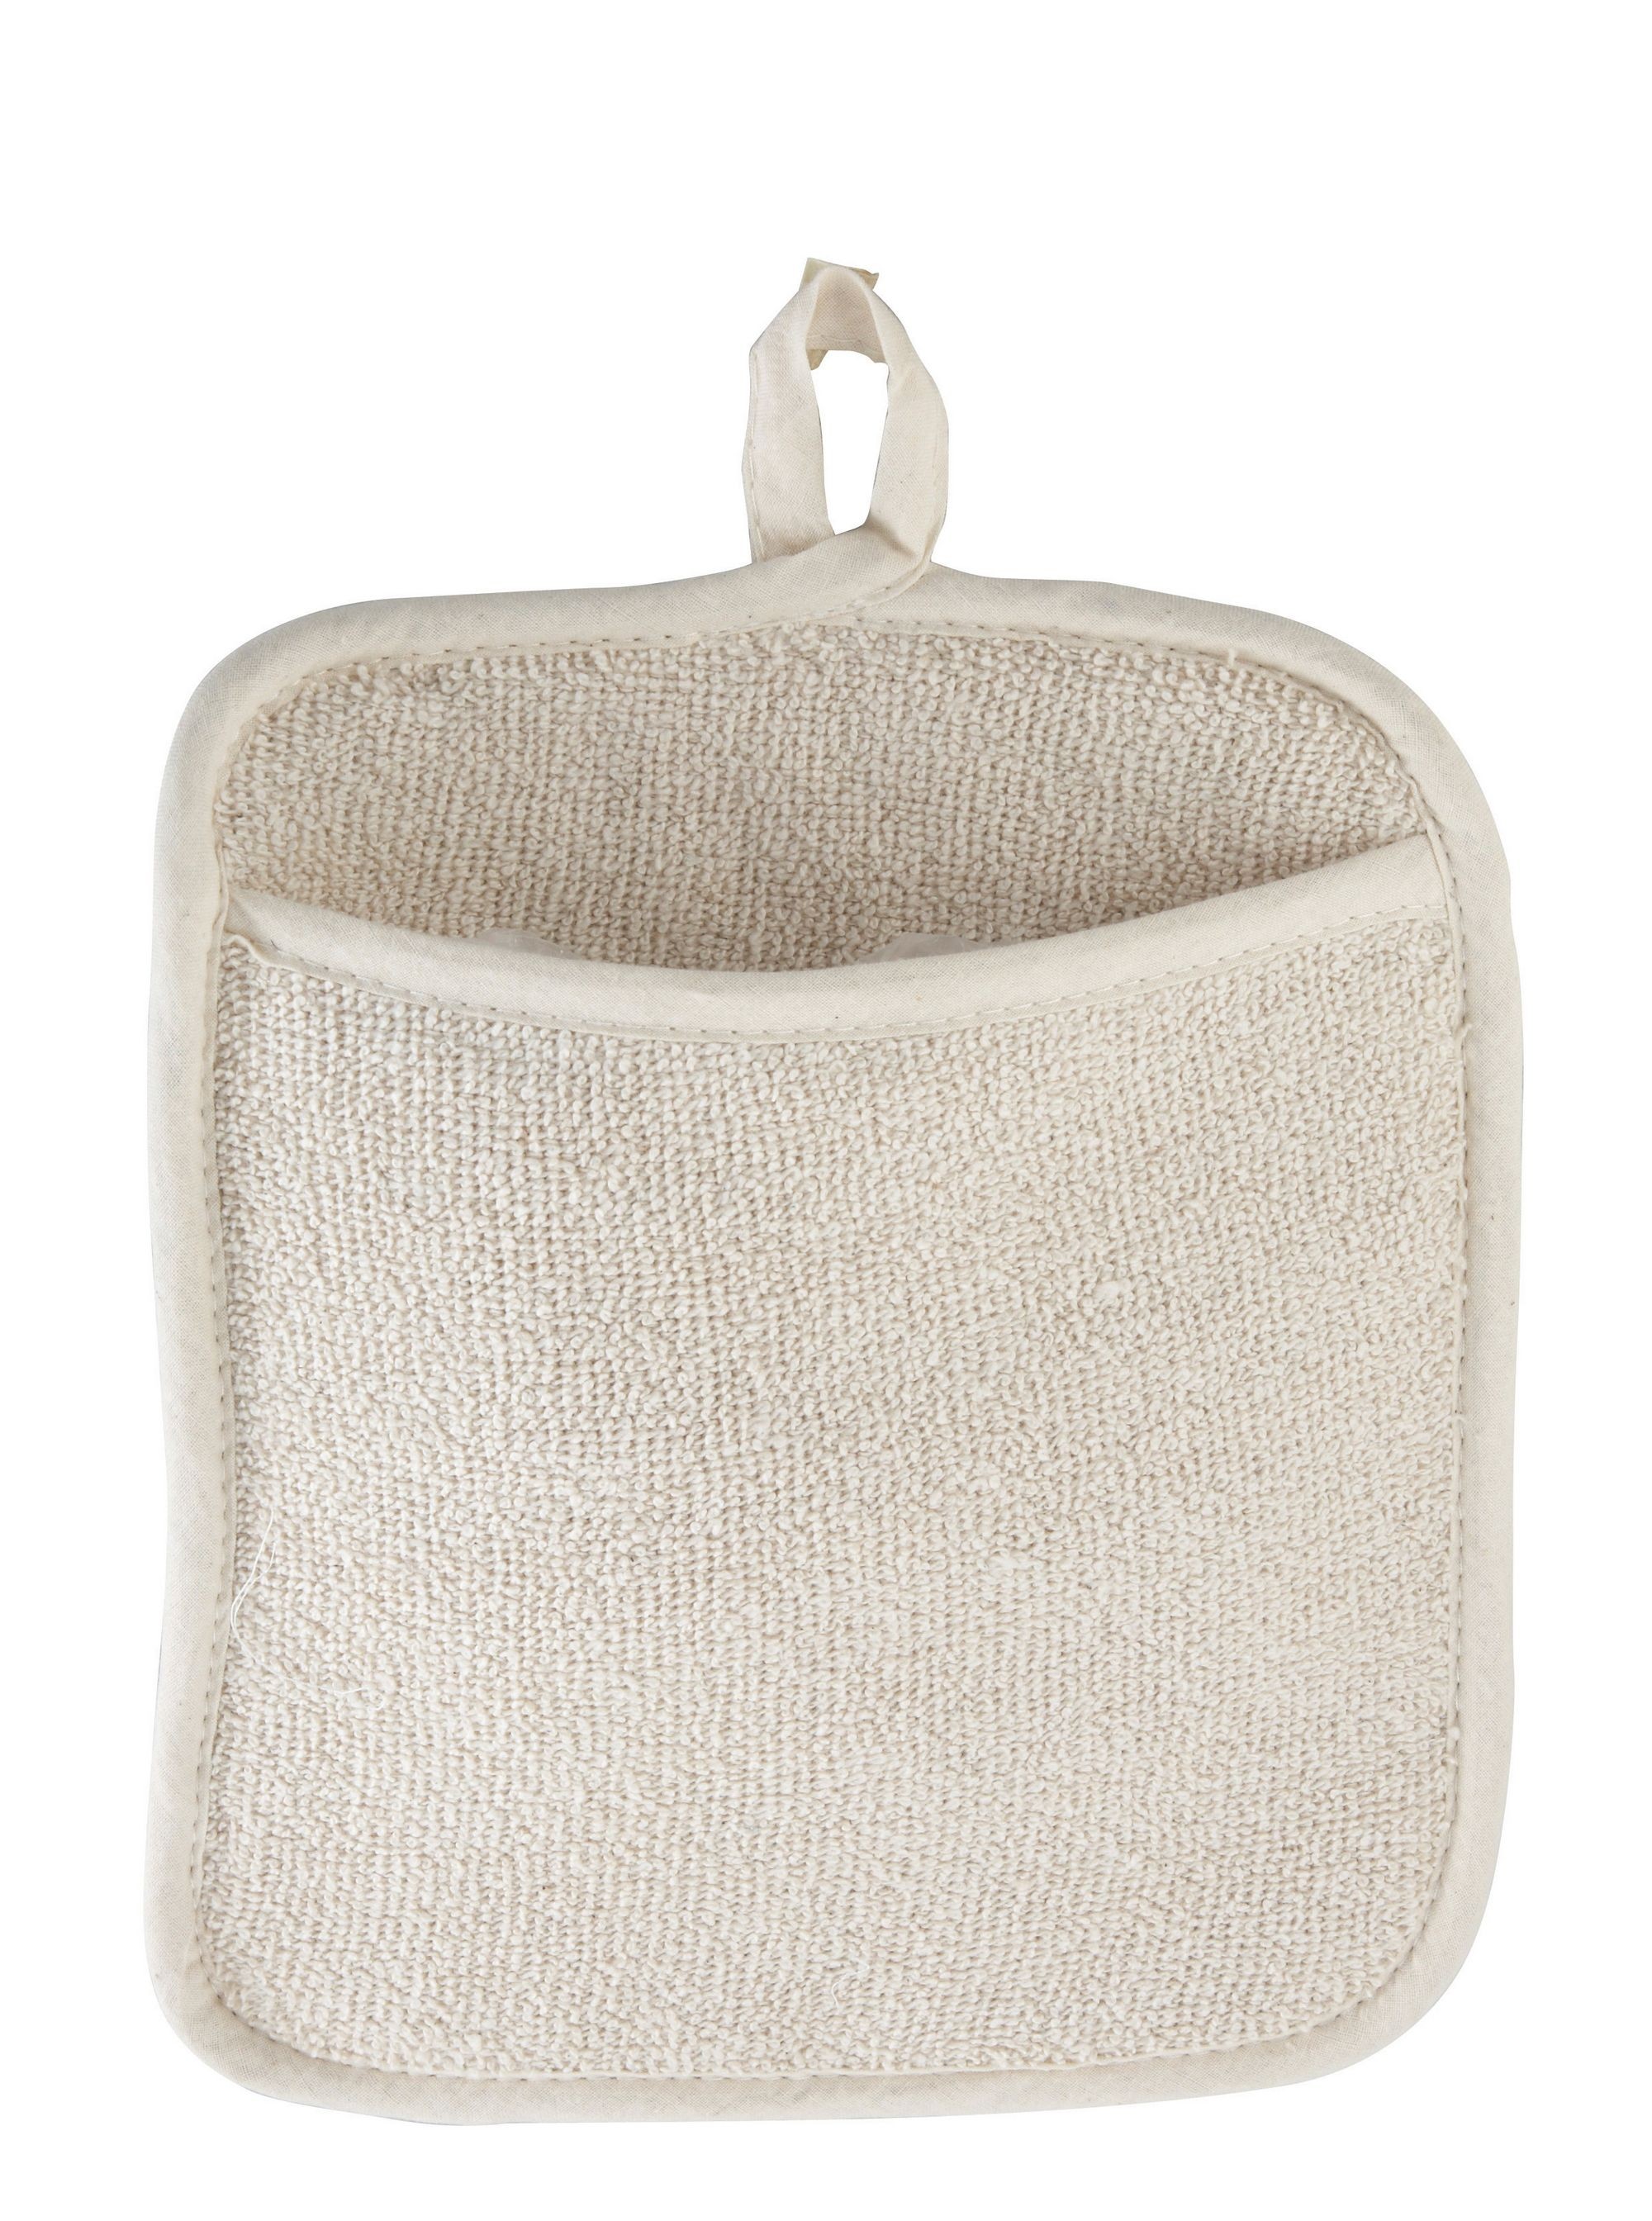 White Terry Material Pot Holder With Pocket - 8-1/2 X 9-1/2